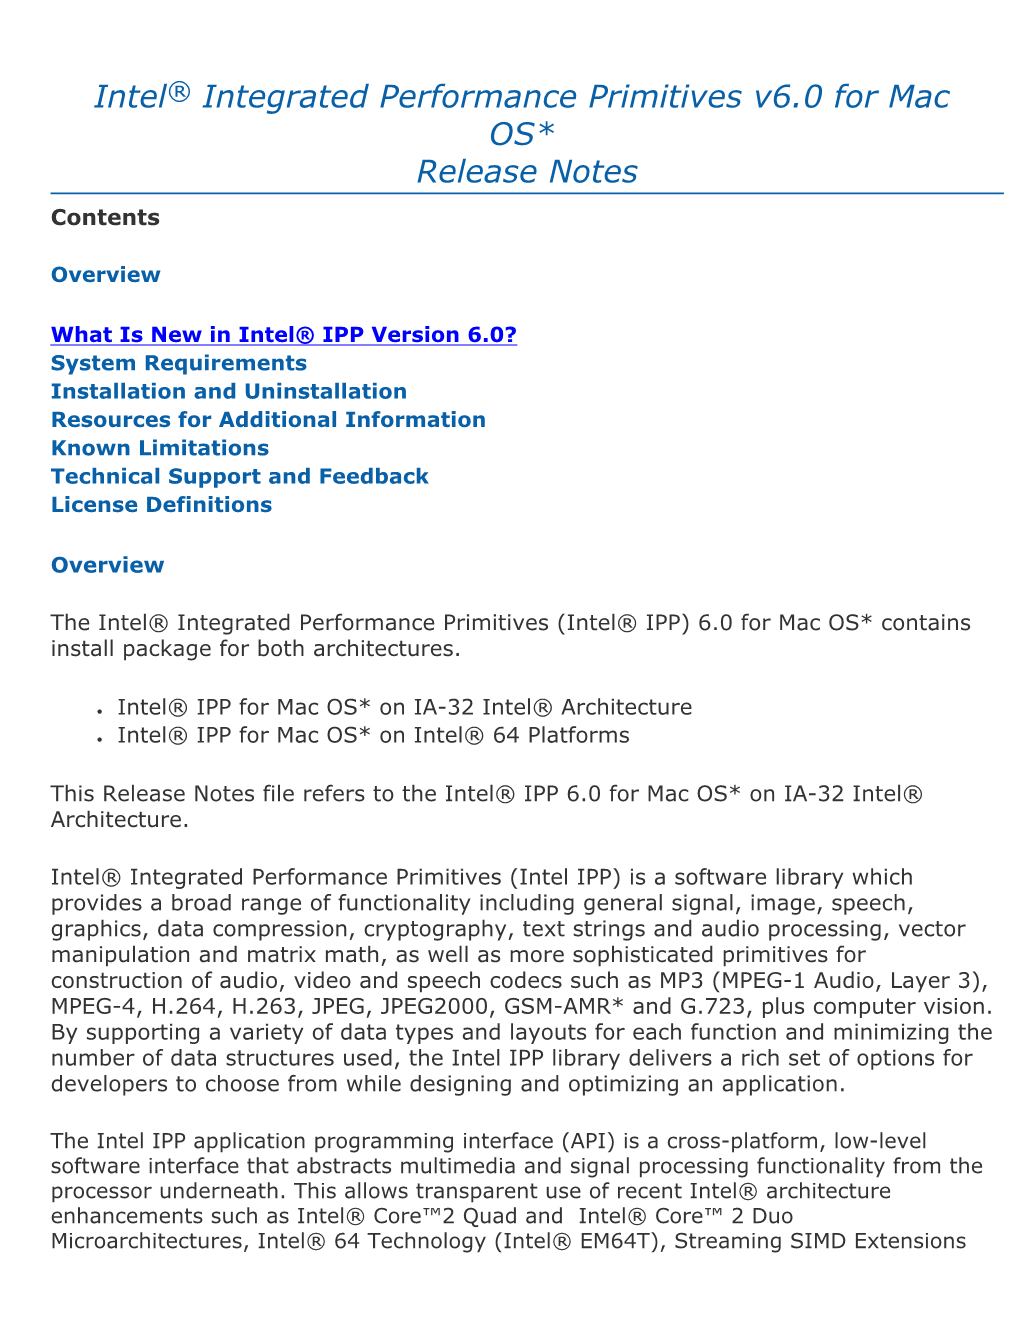 Intel® Integrated Performance Primitives for Mac OS* Release Notes